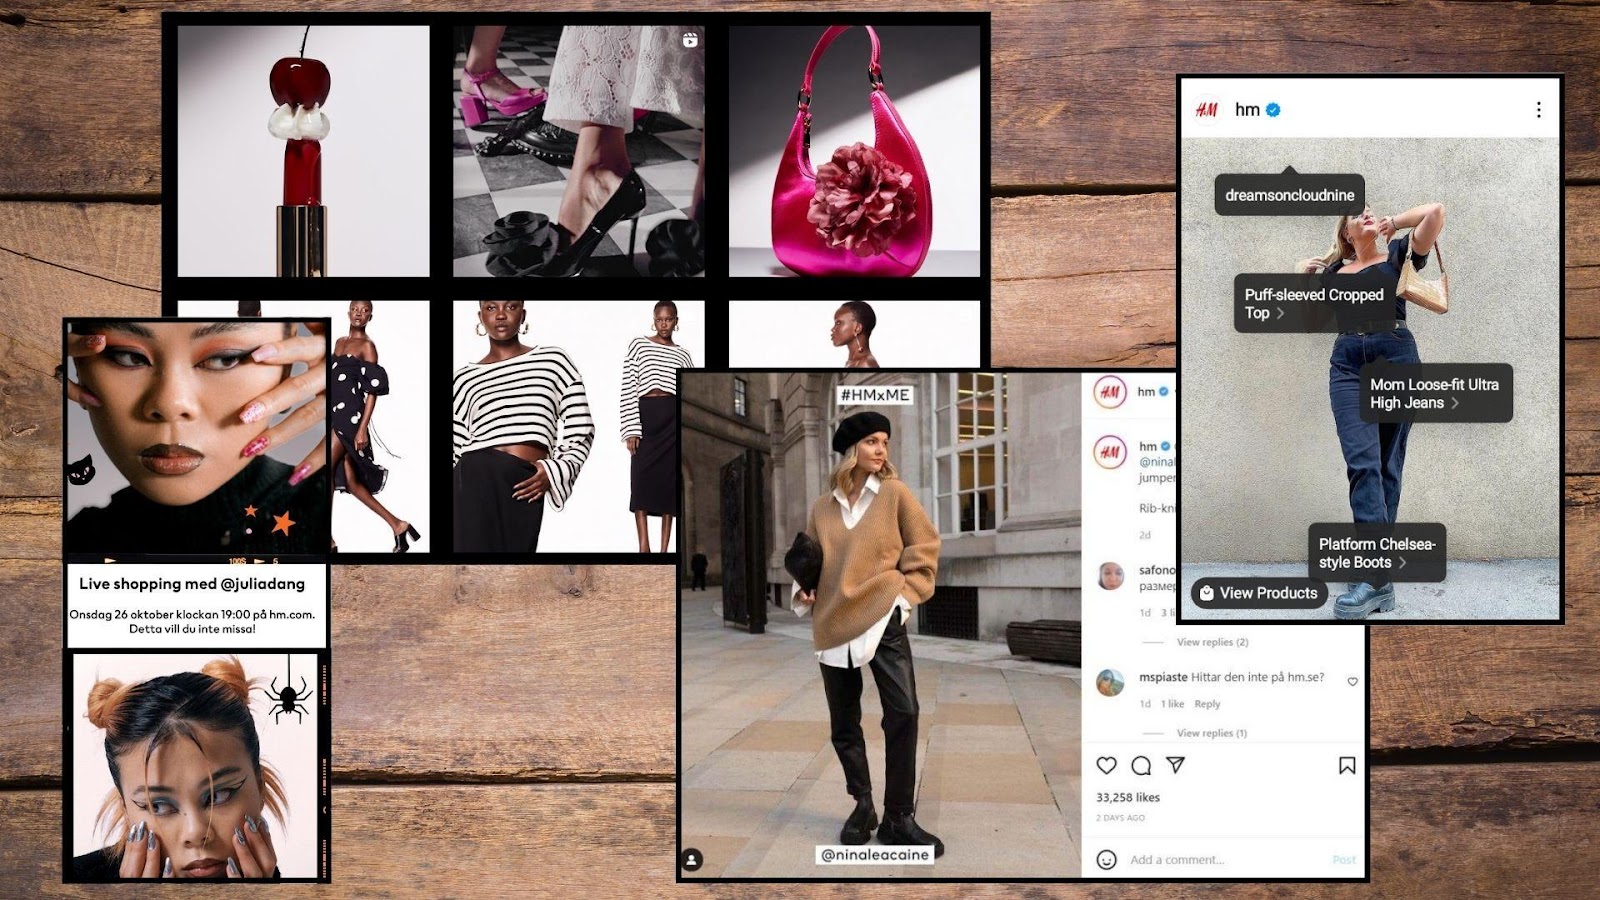 H&M is one of the first fashion brands that embraced social commerce.